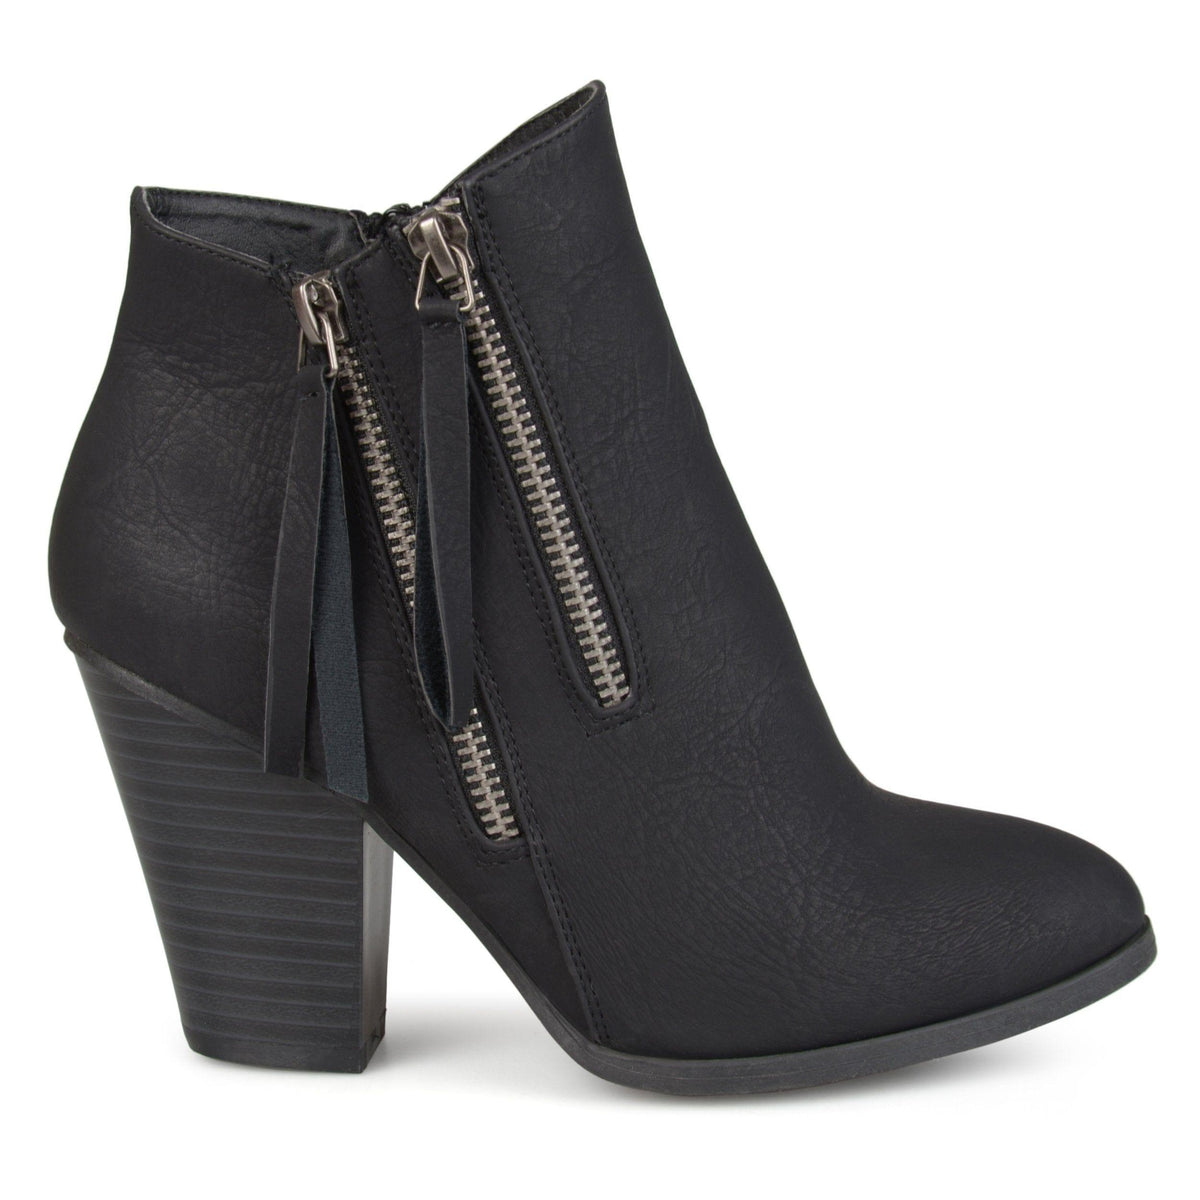 Vally Bootie | Women's Faux Leather Ankle Boots | Journee Collection